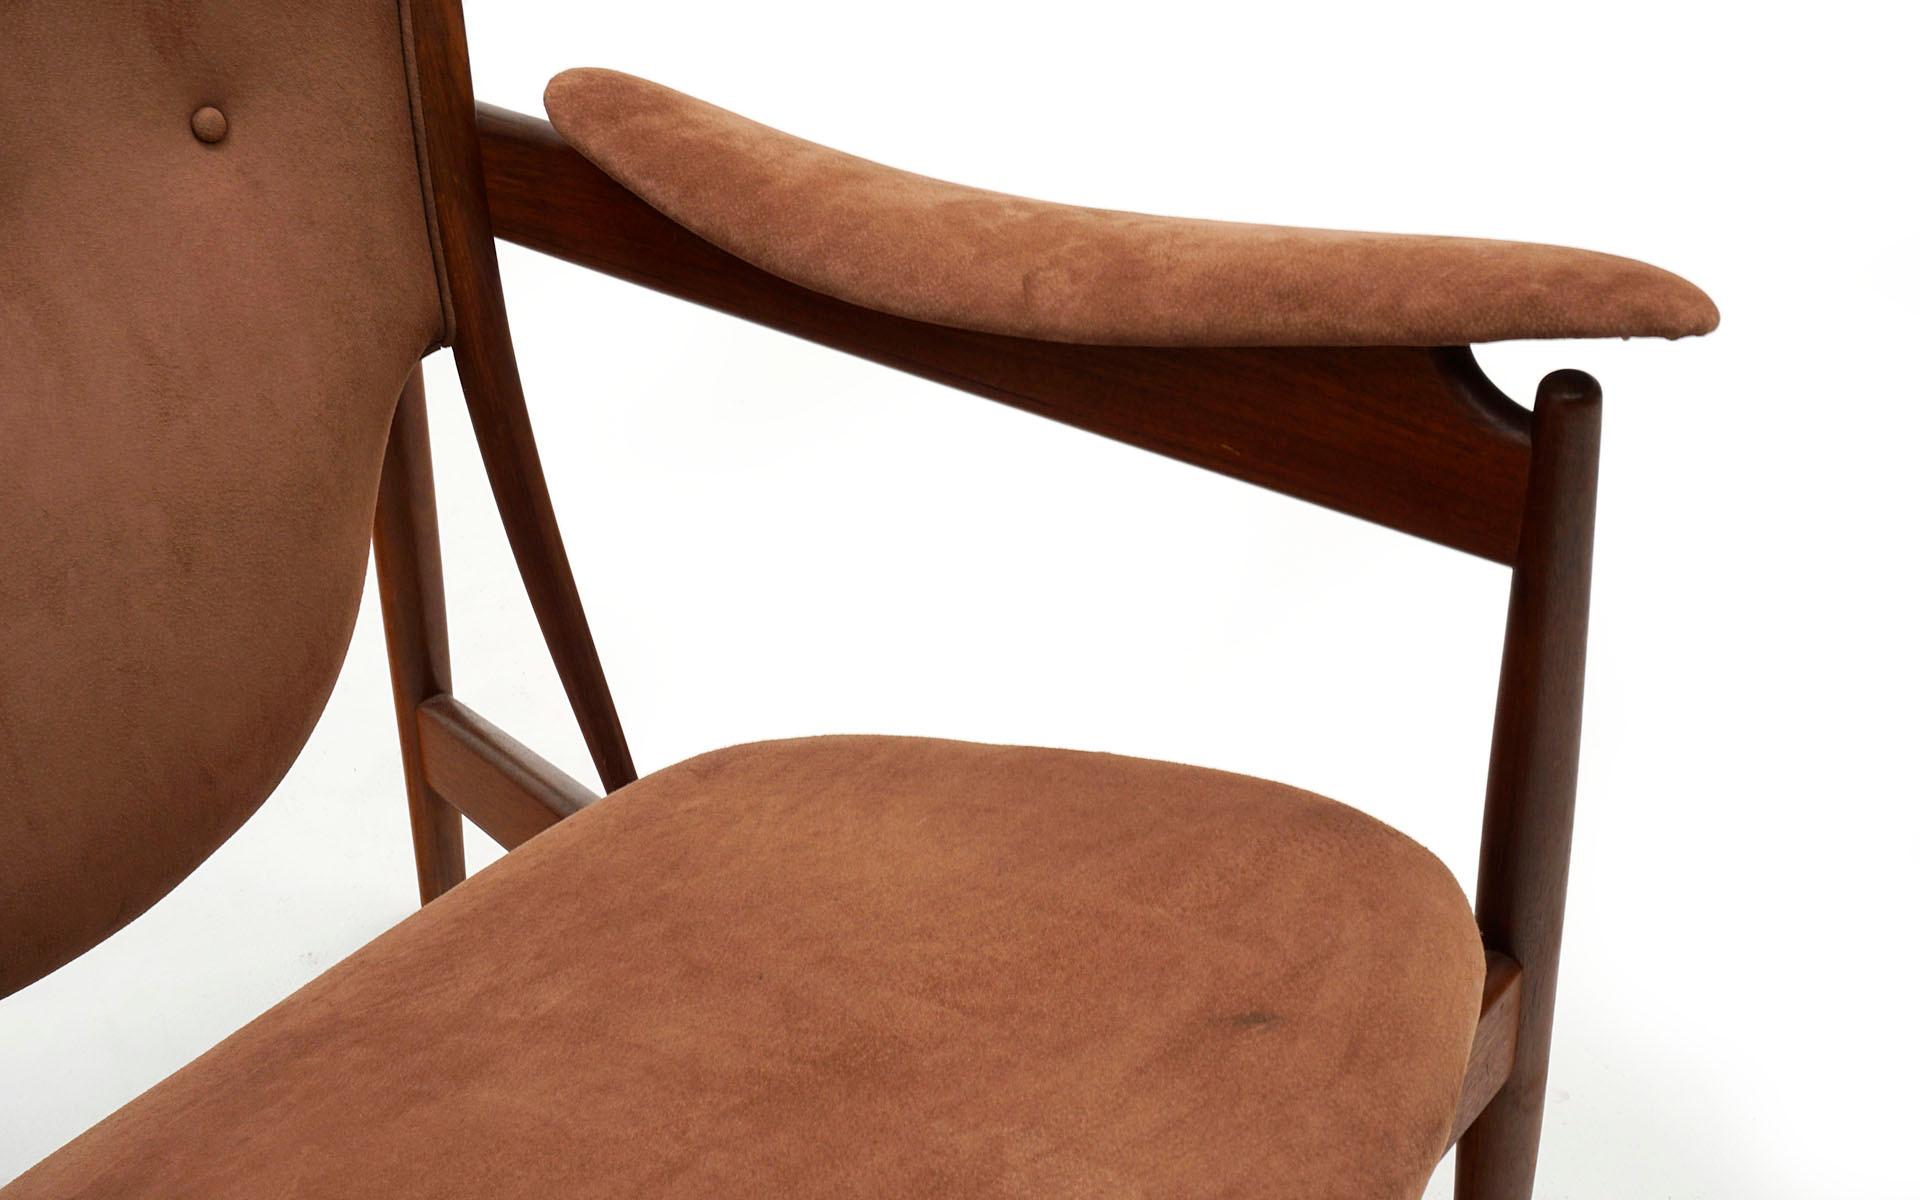 Early Chieftain Chair by Finn Juhl for Niels Vodder Teak and Suede, Signed 1